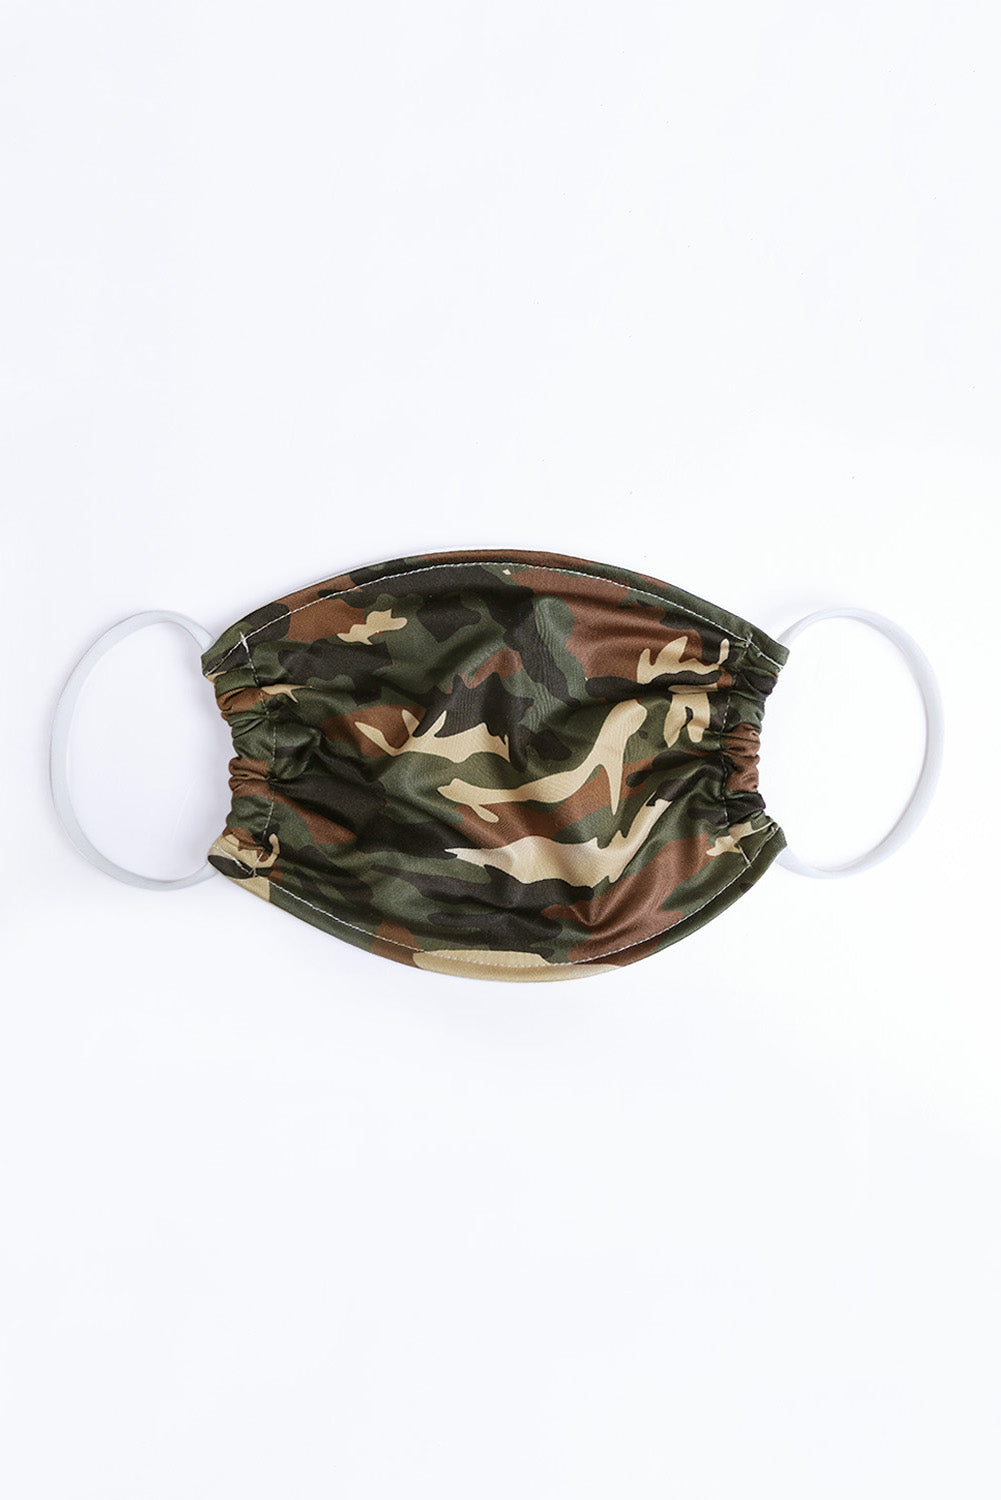 Face Mask Camo Green Print Ships from USA